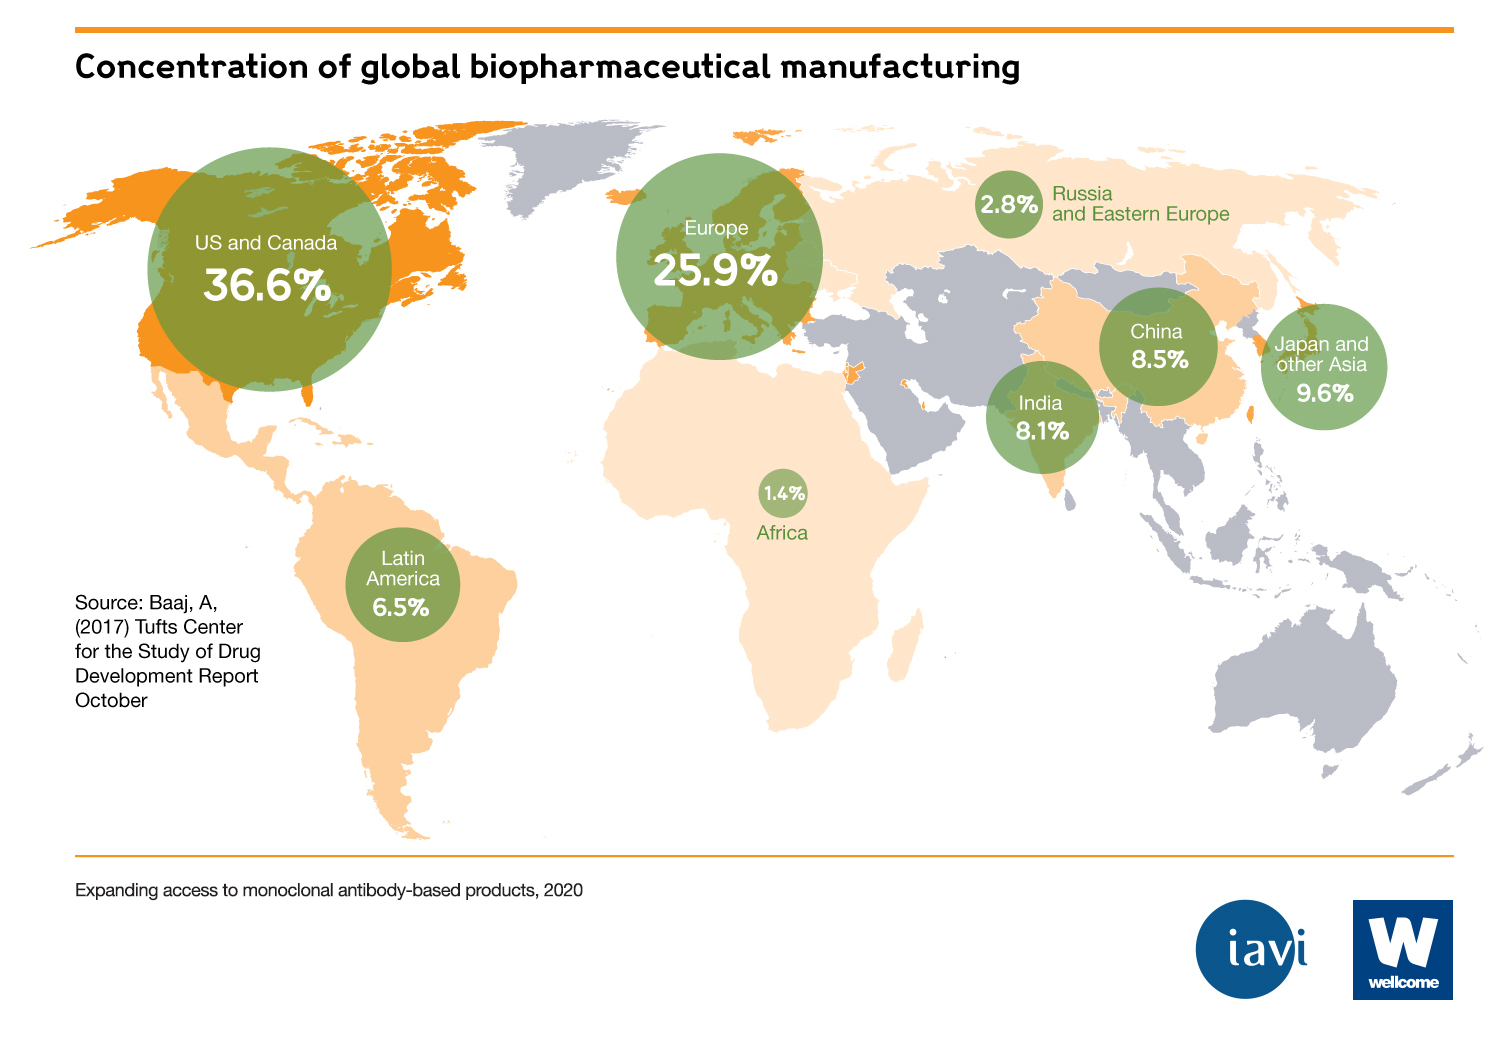 Map of the world showing the percentage of global pharmaceutical manufacturing that happens in different countries